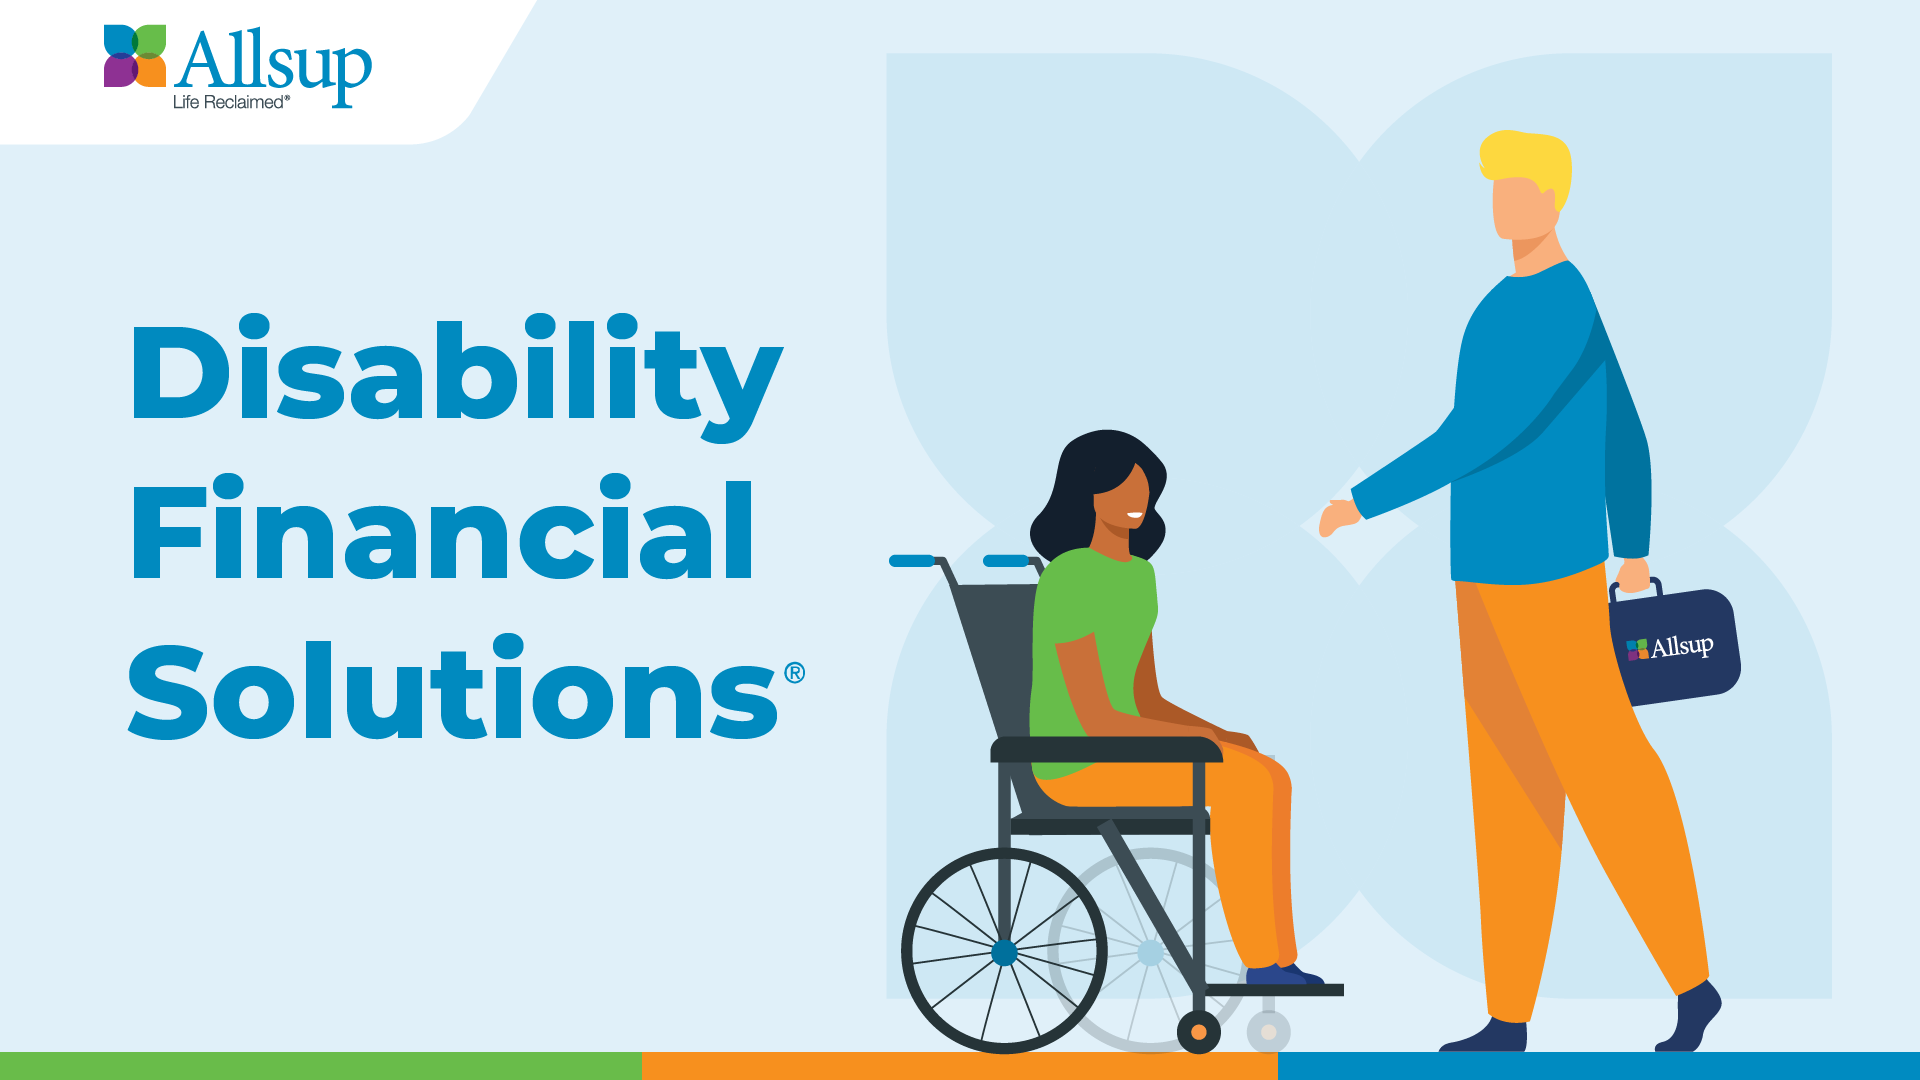 Learn more about Disability Financial Solutions®